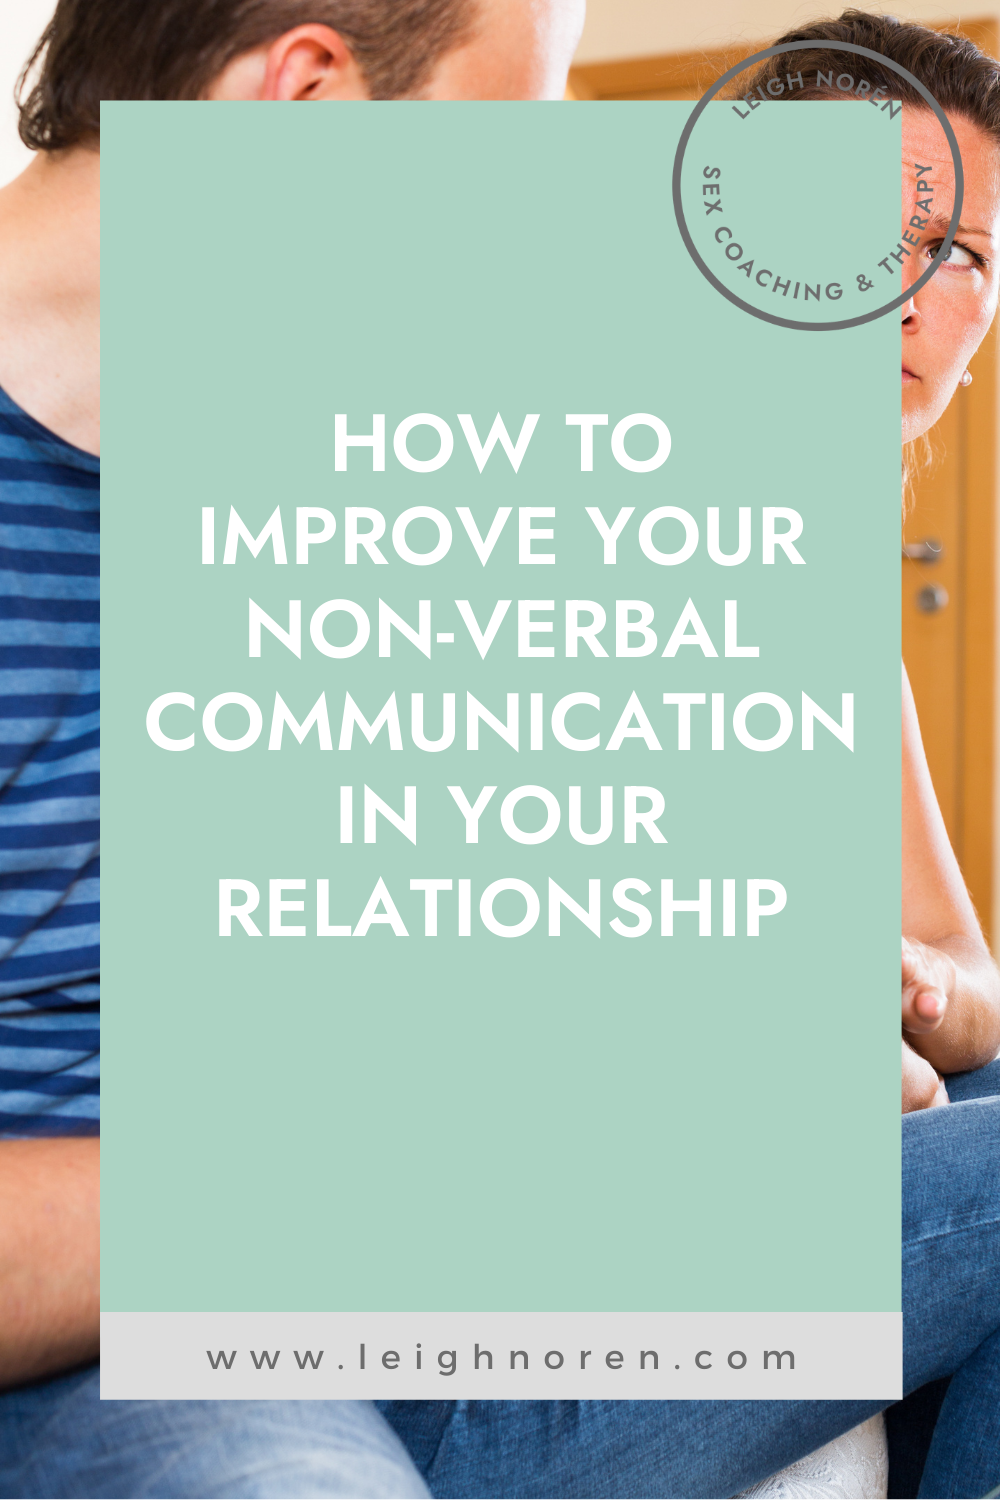 How to Improve Your Non-verbal Communication In Your Relationship